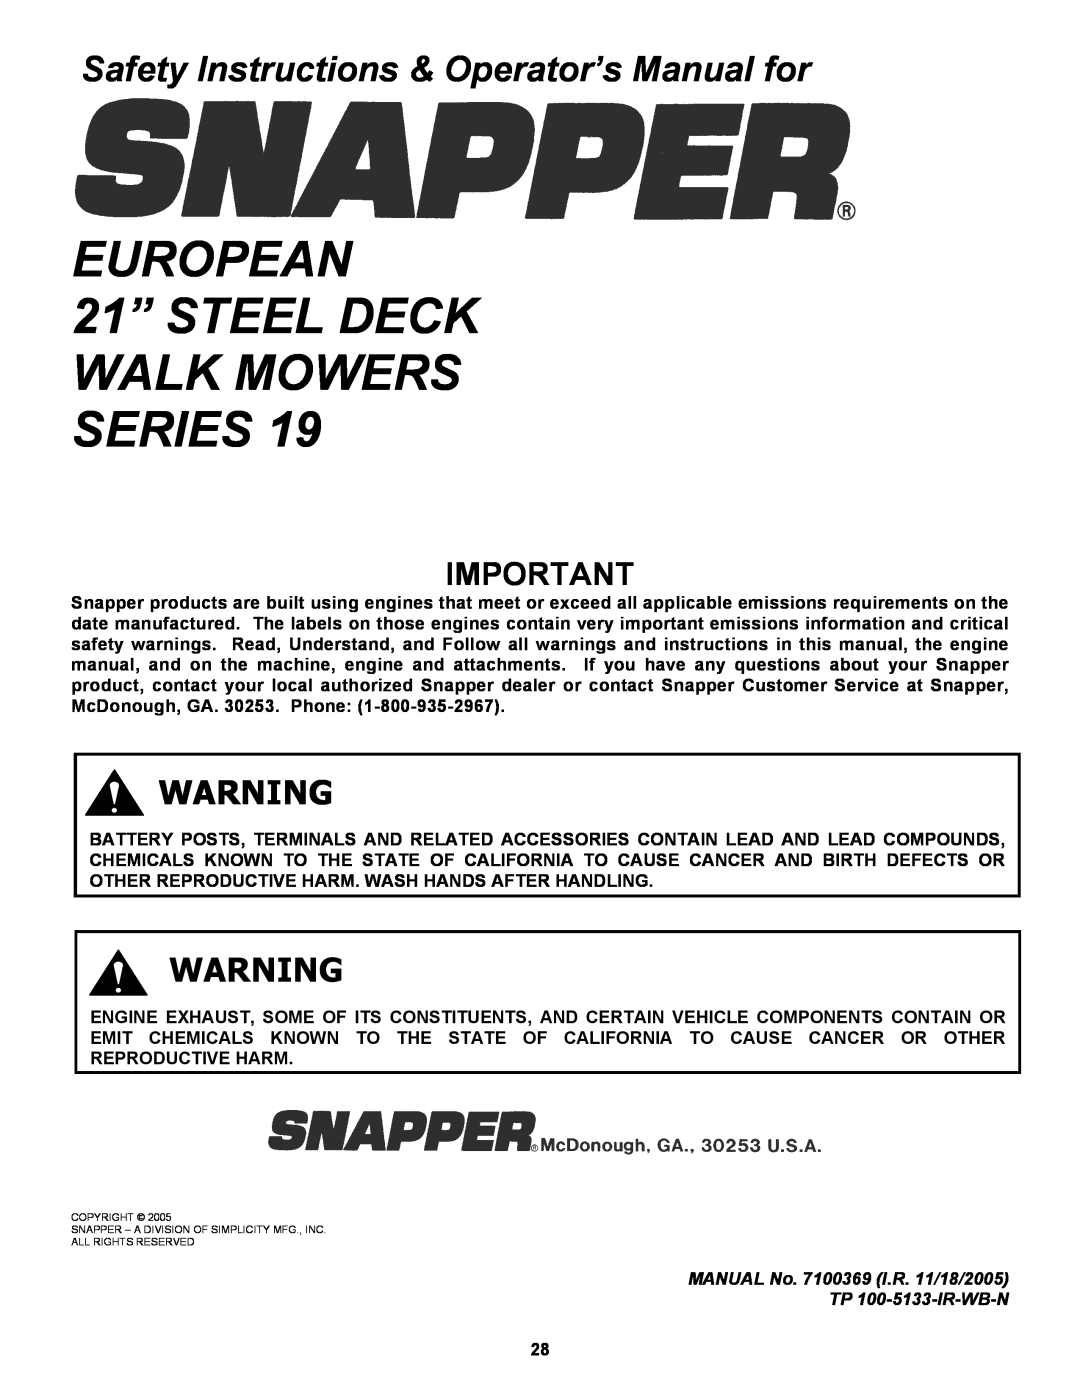 Snapper EP217019BV EUROPEAN 21” STEEL DECK WALK MOWERS SERIES, Safety Instructions & Operator’s Manual for 